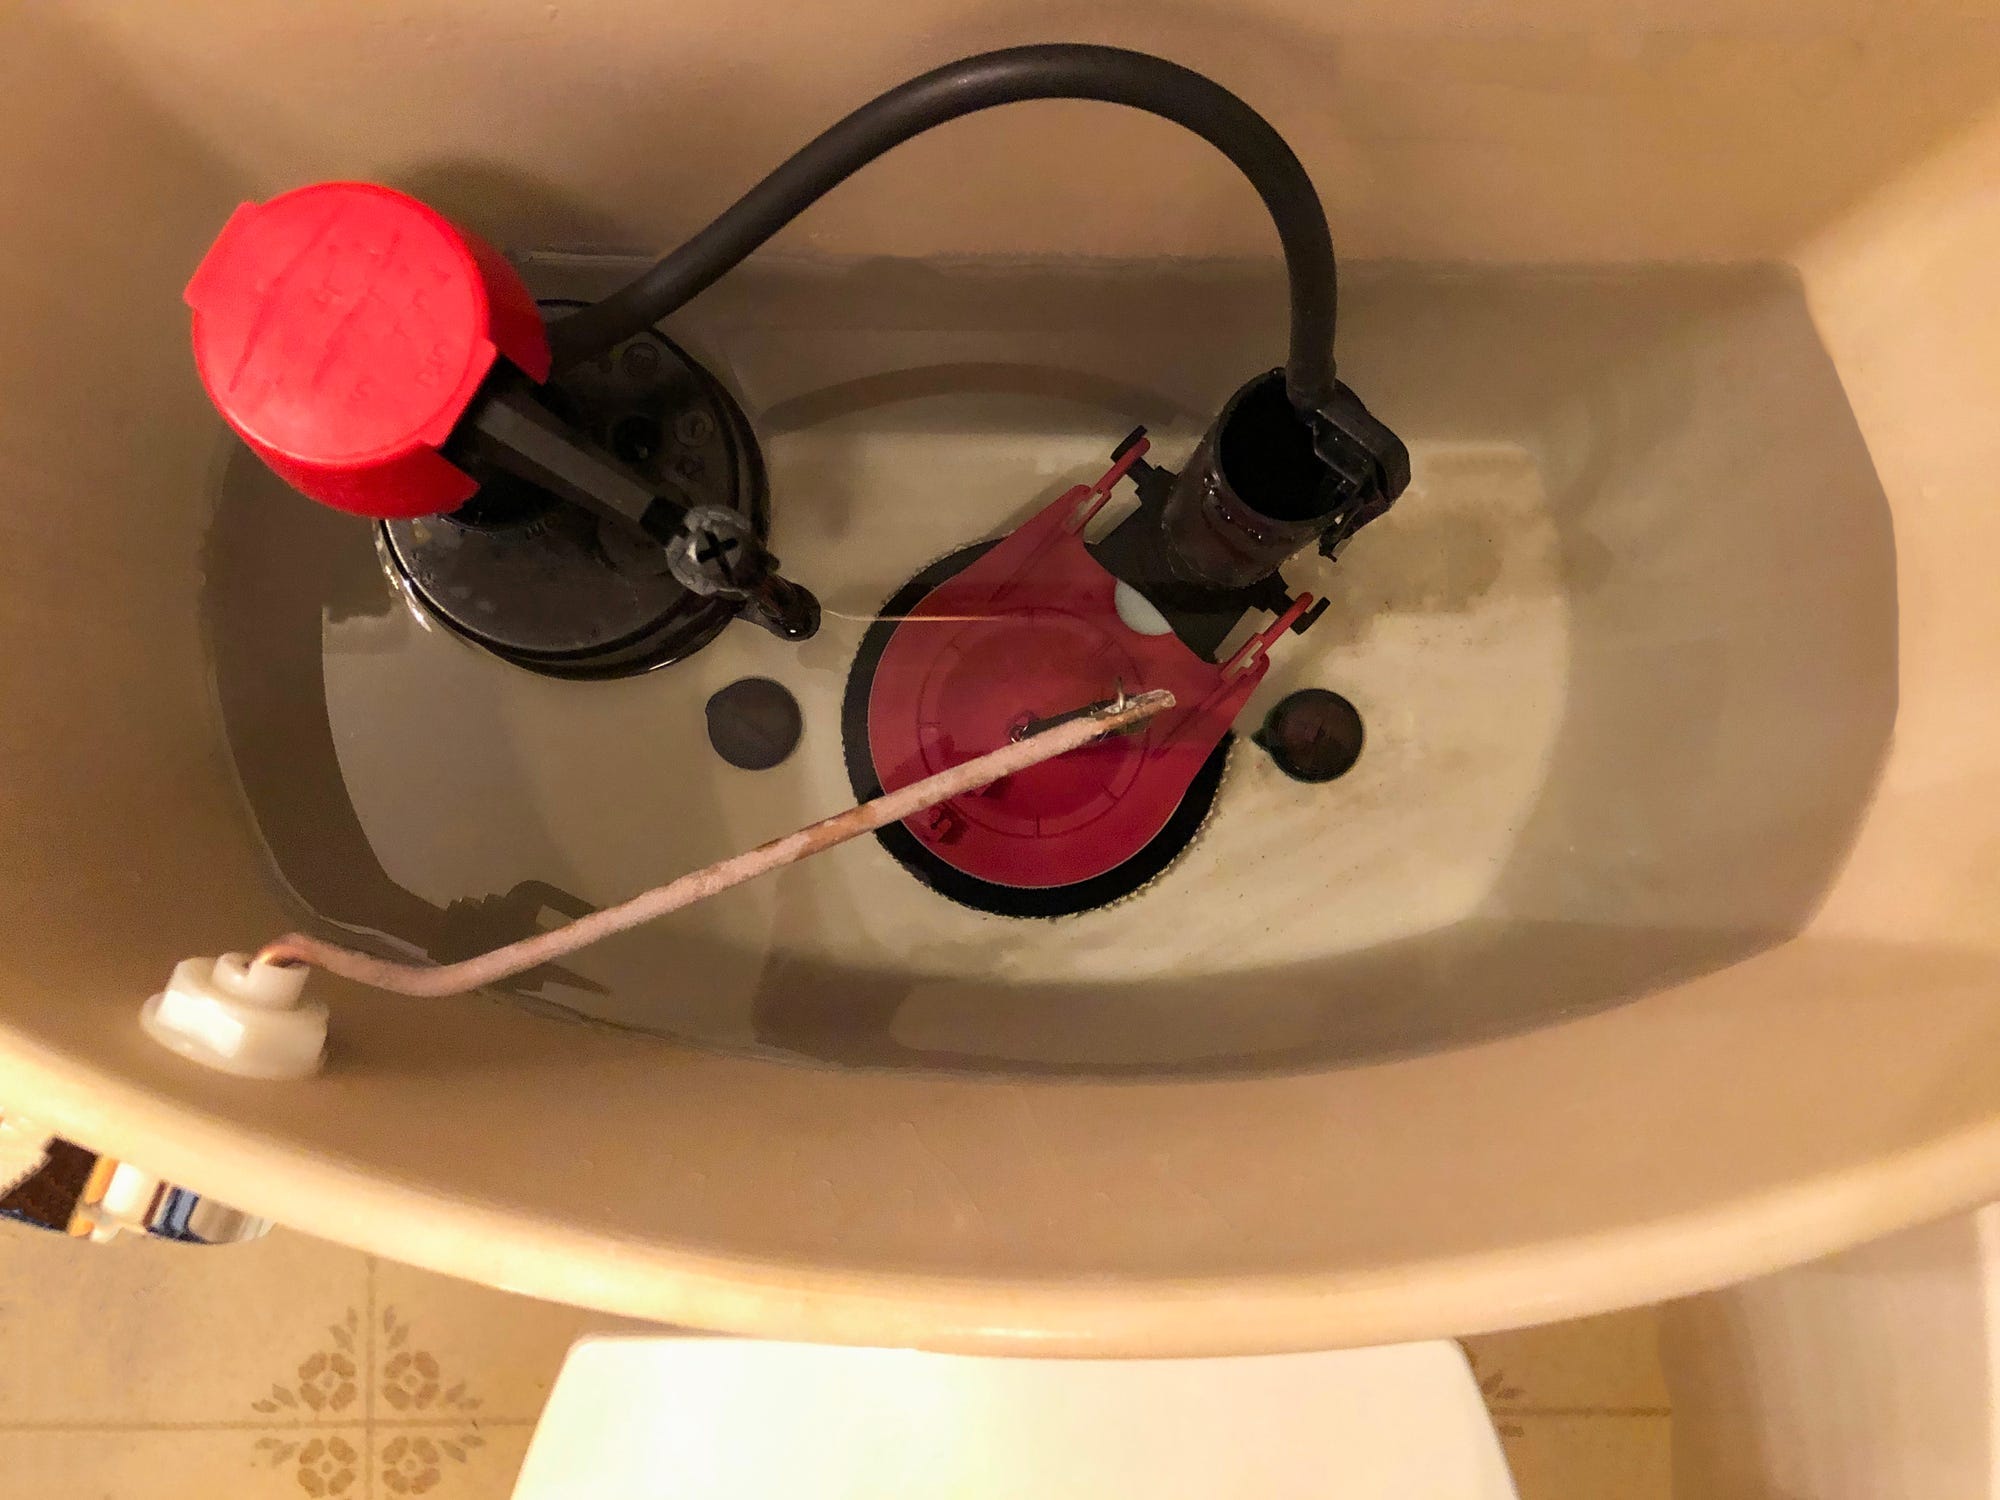 The inner workings of a toilet tank